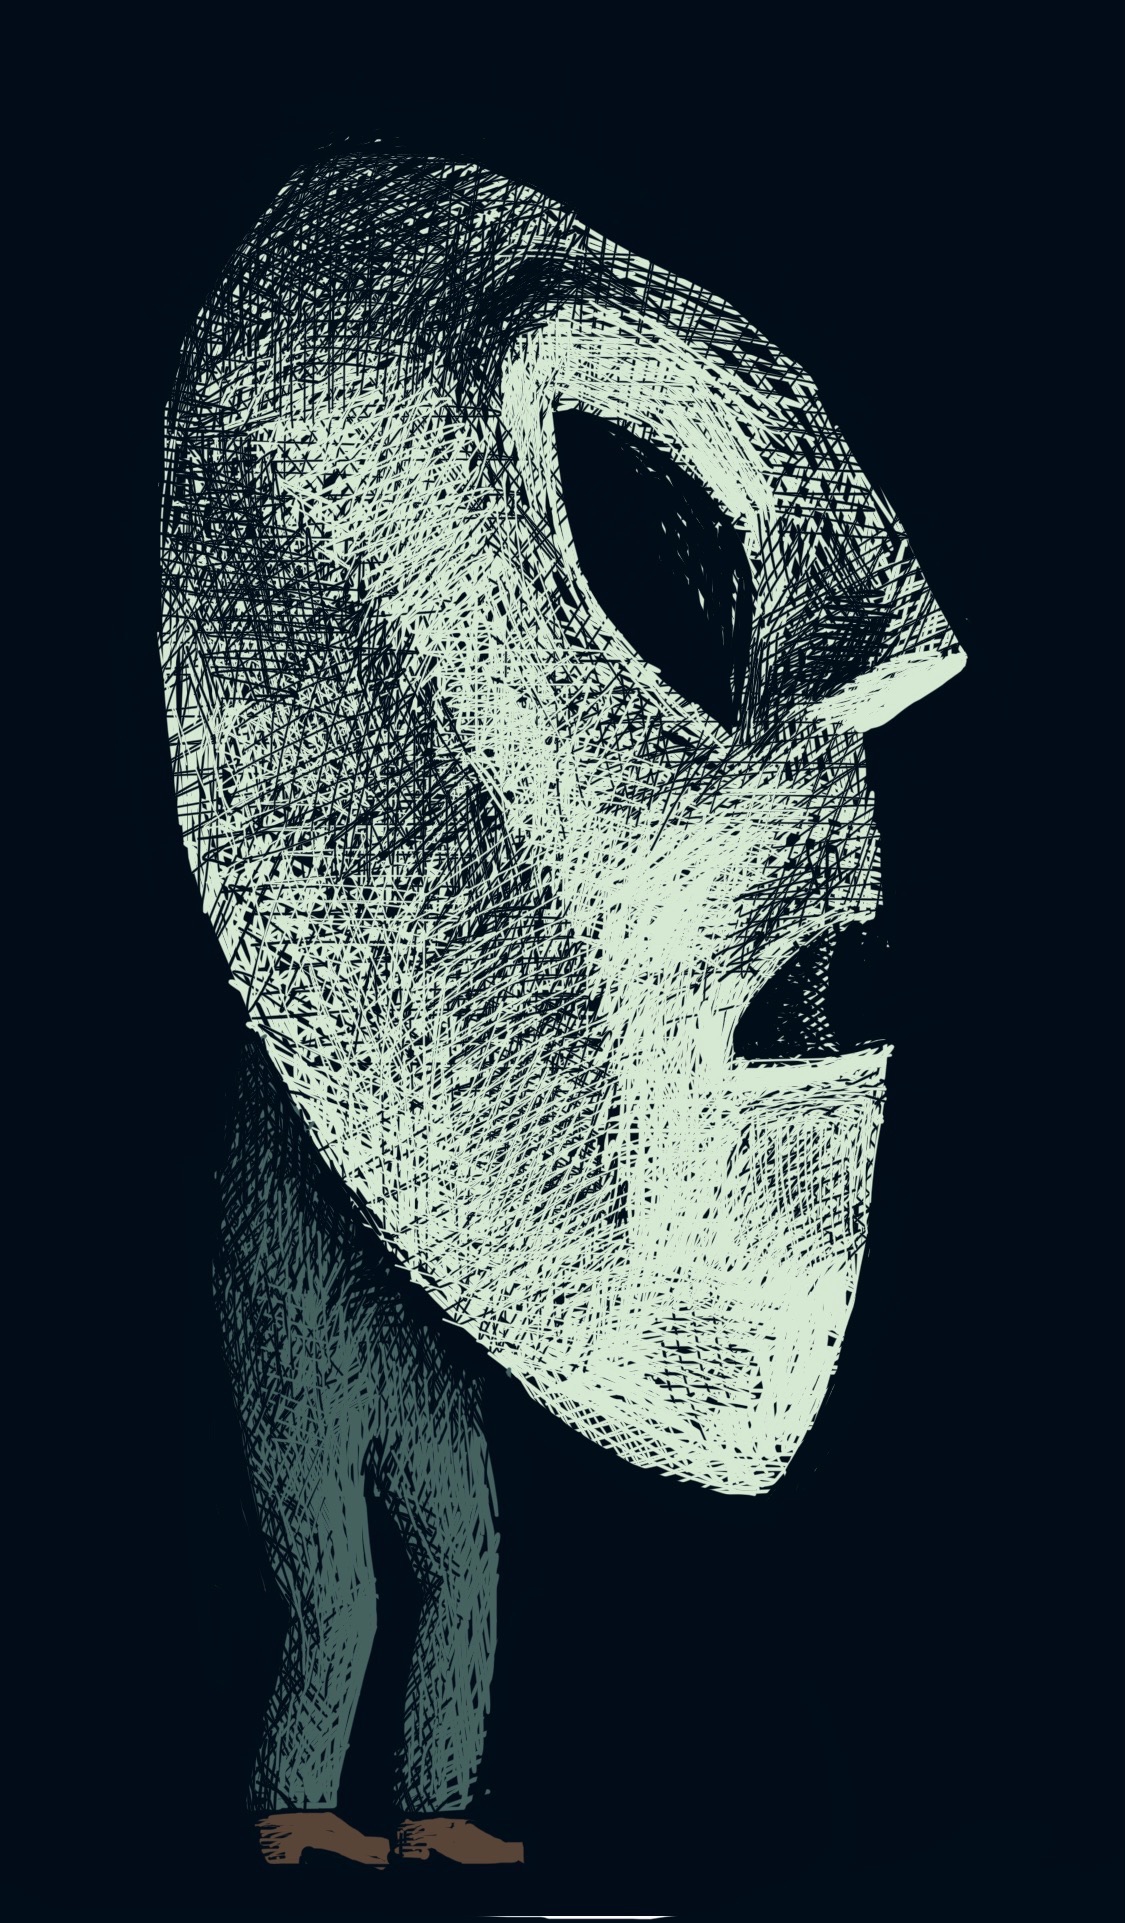 A person wearing a giant wooden mask, illuminated from below